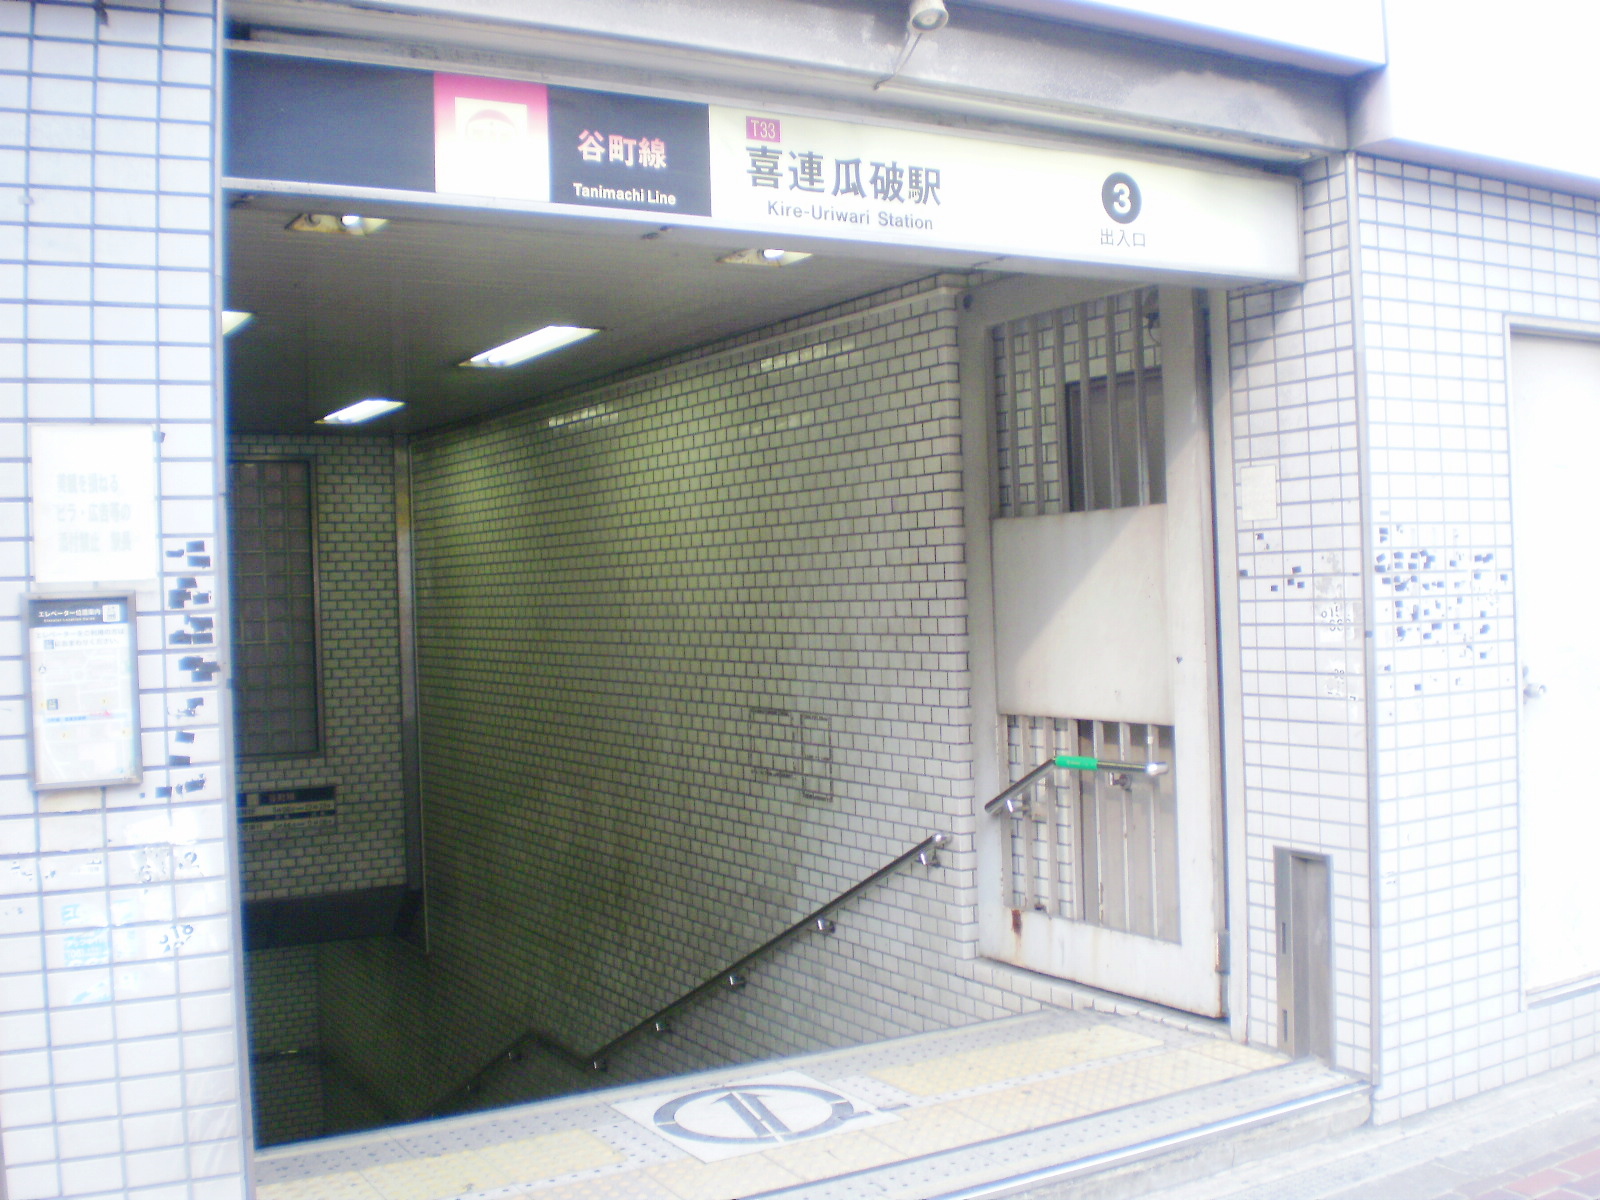 Other. Kire-Uriwari Station No. 4 doorway (other) up to 10m